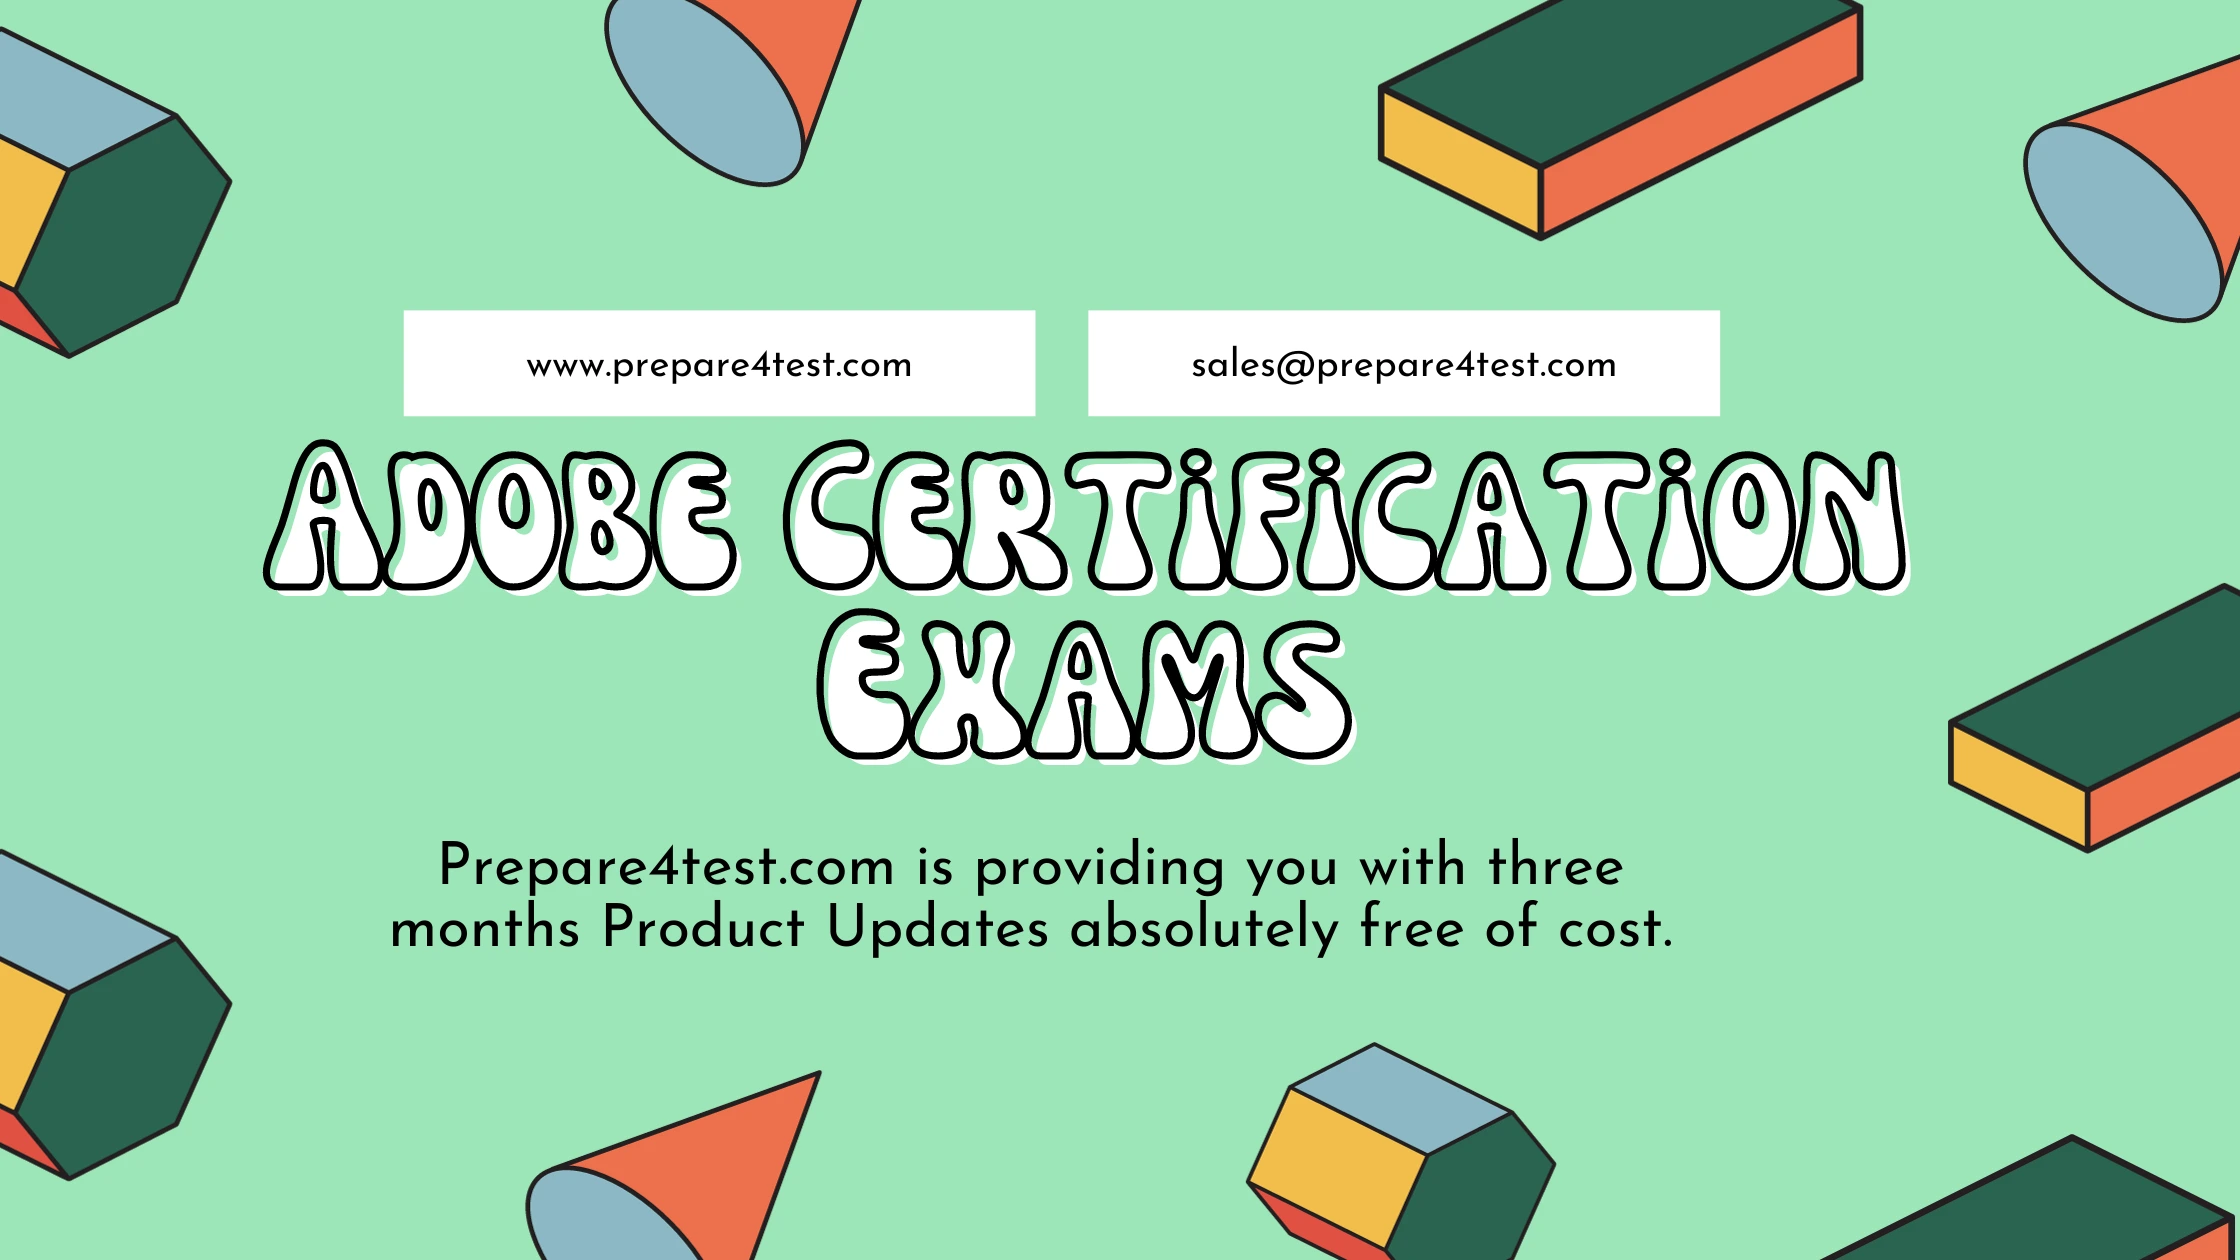 Adobe Certification Exams promotion